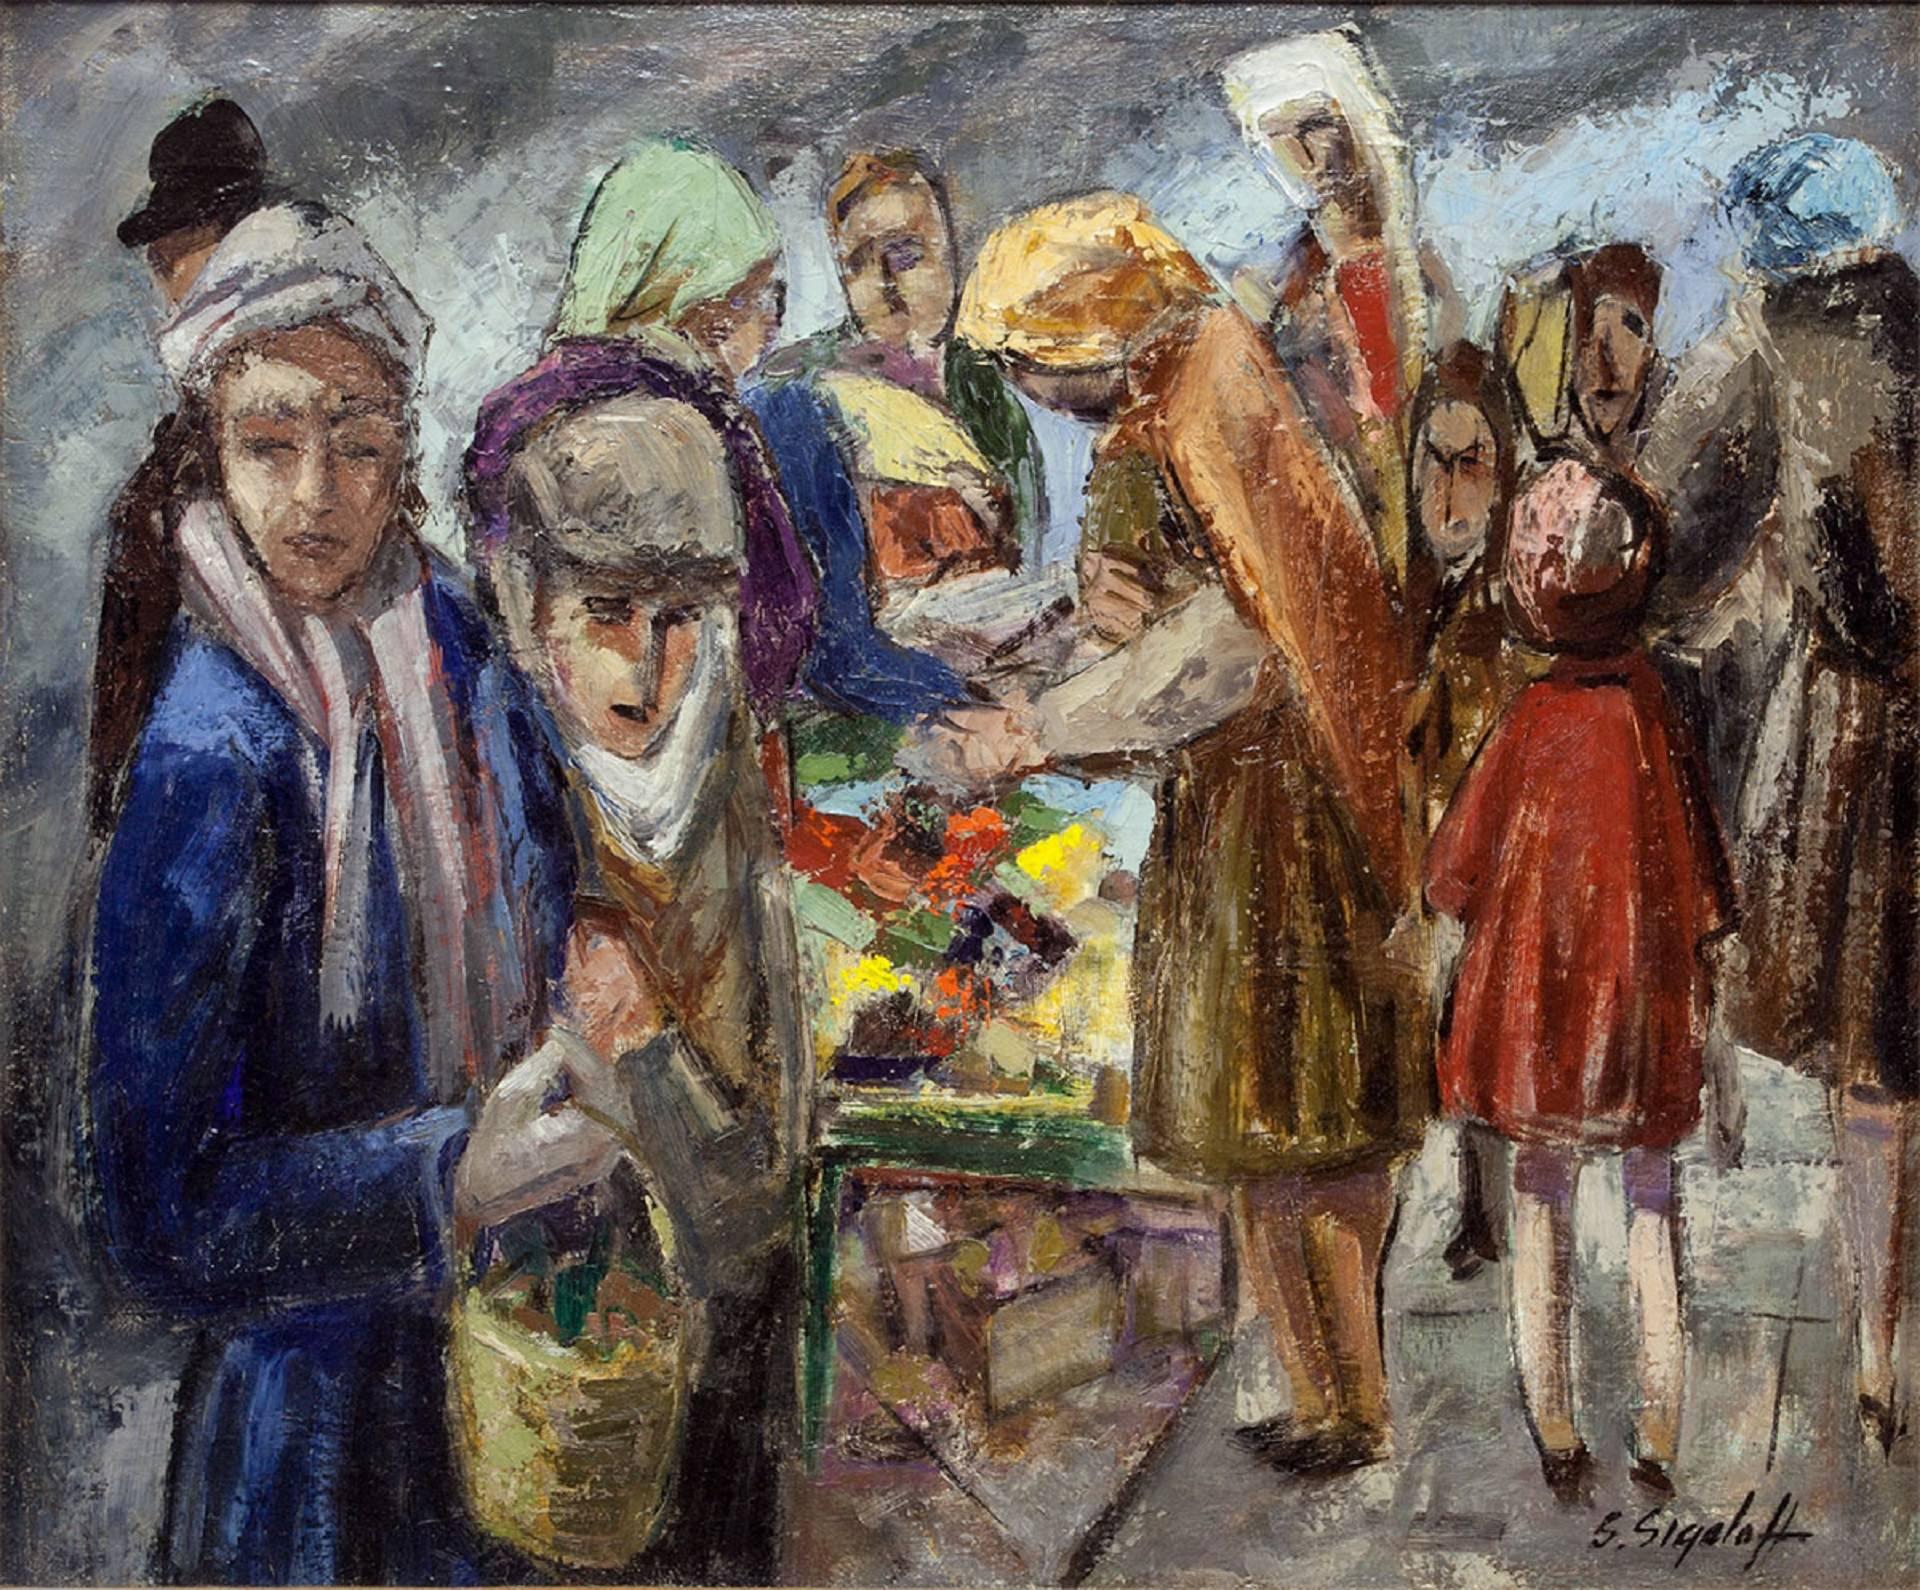 Jewish Peddlers on Market Day - Painting by Samuel Sigaloff